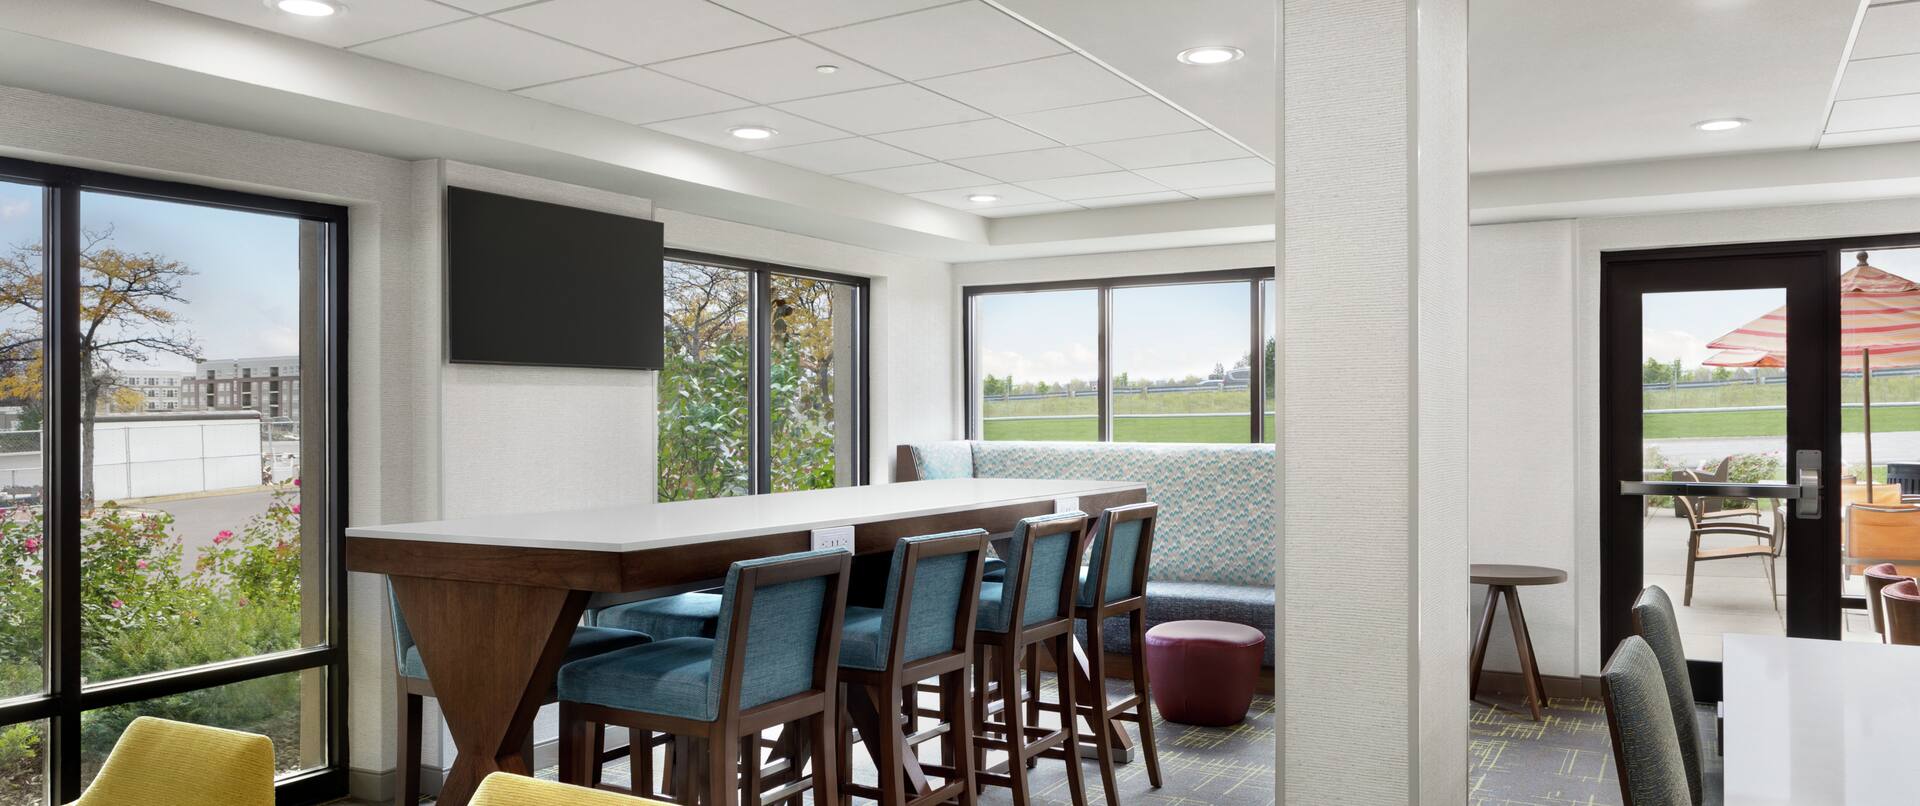 Spacious hotel lobby featuring ample seating, communal table, and large windows with natural light.